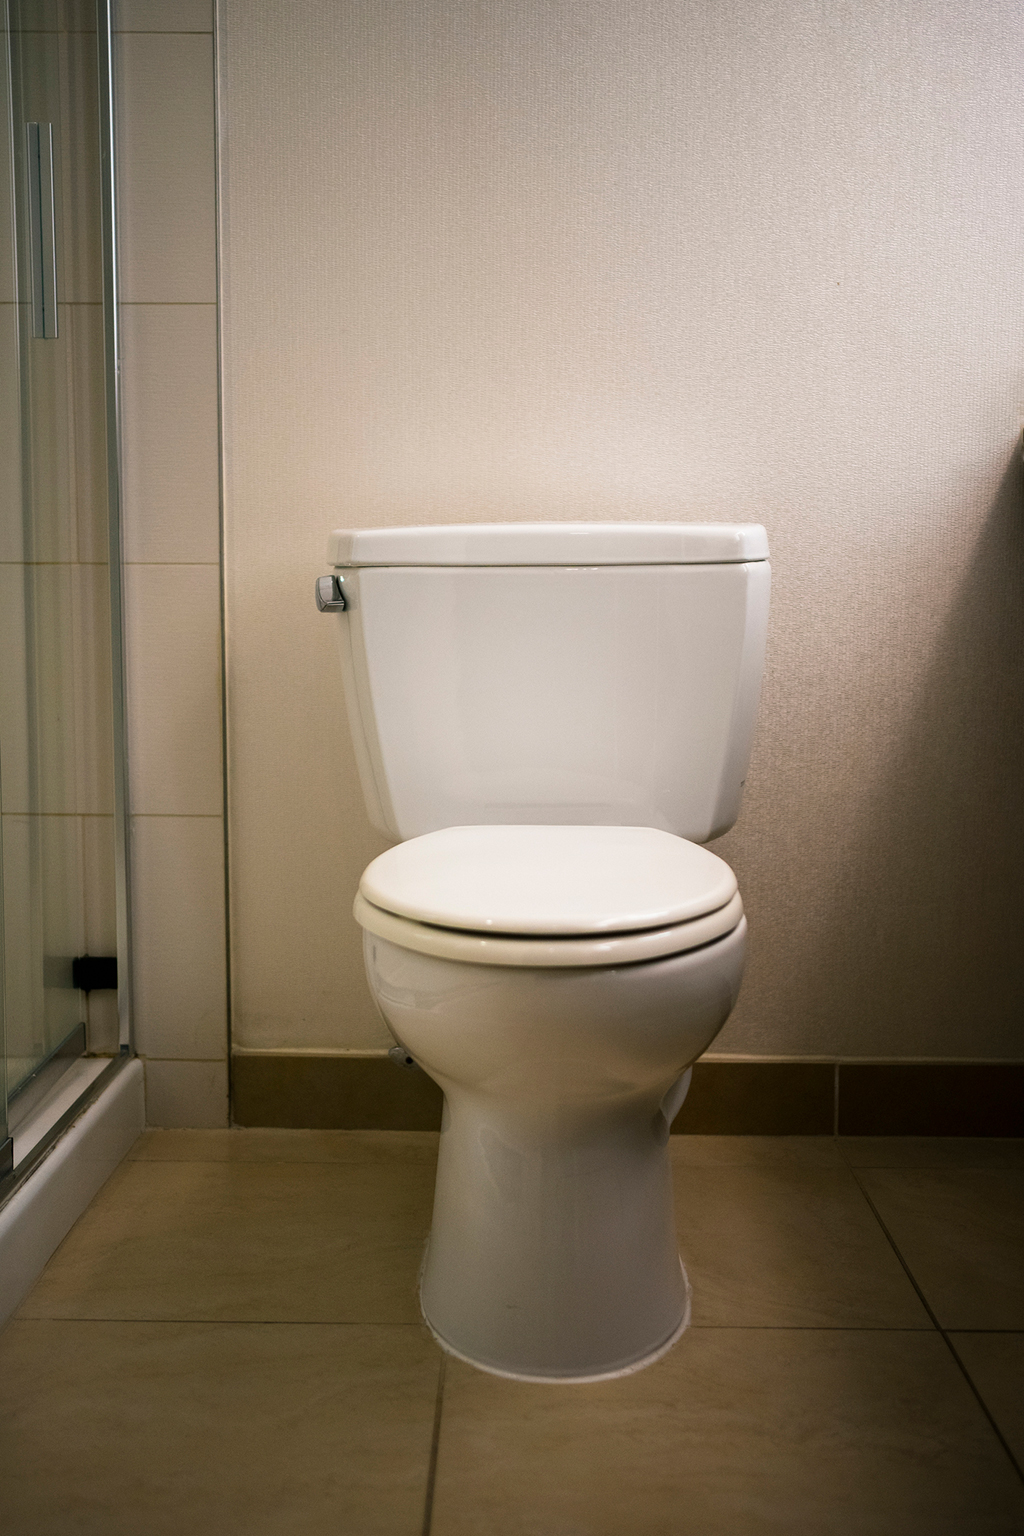 Is It Time For A New Toilet? Your Plumber Can Help | Denton, TX